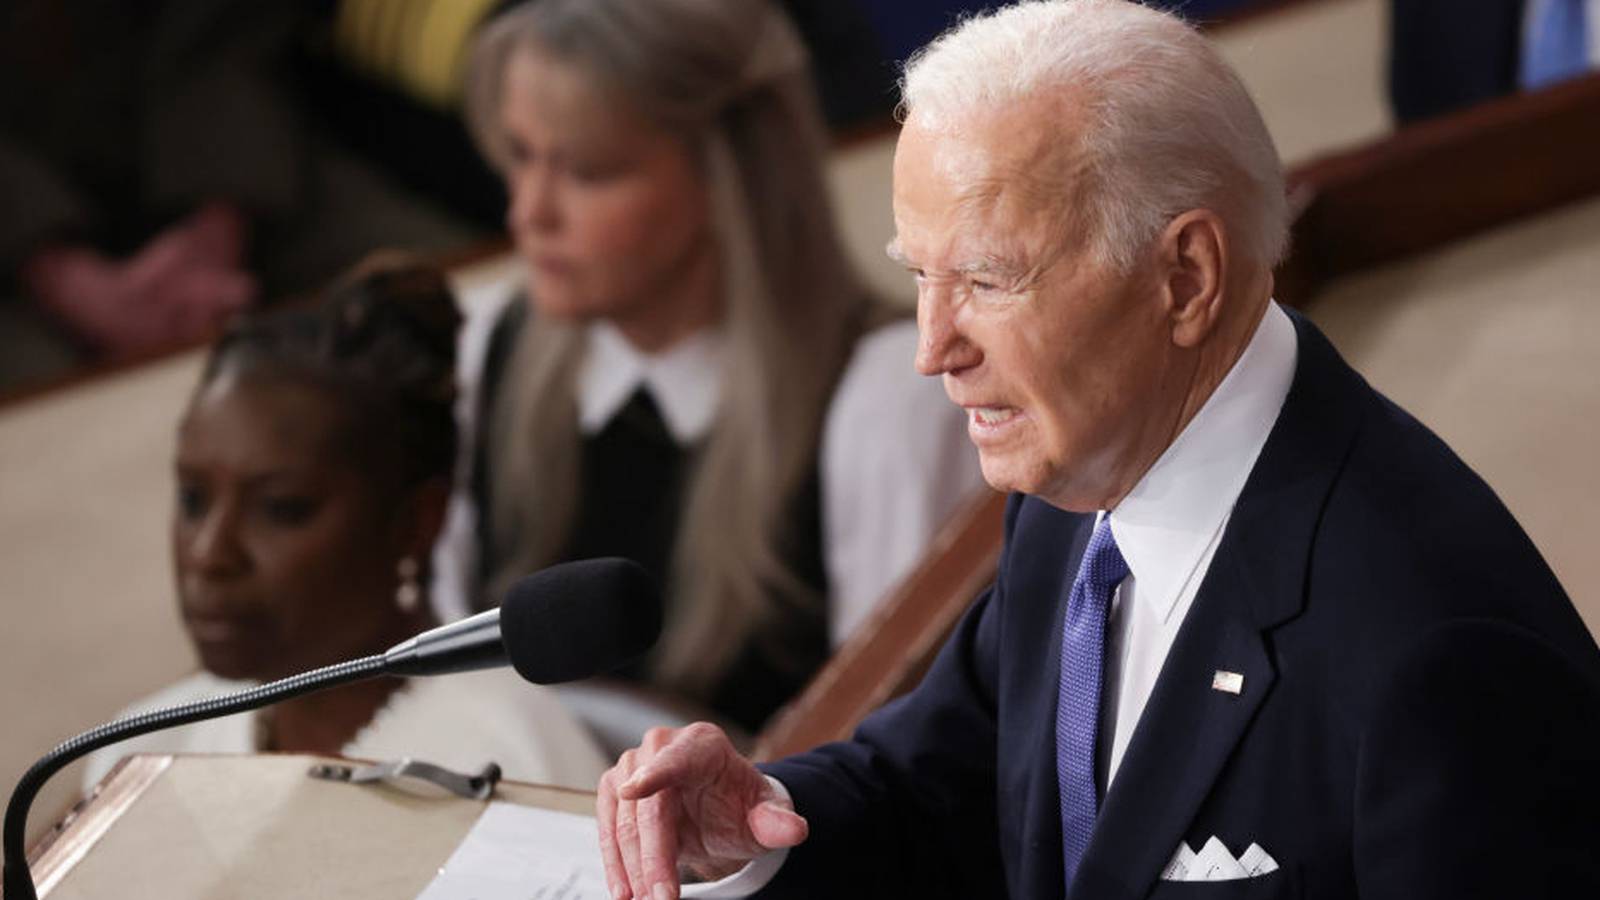 State of the Union Read the transcript of President Biden’s address